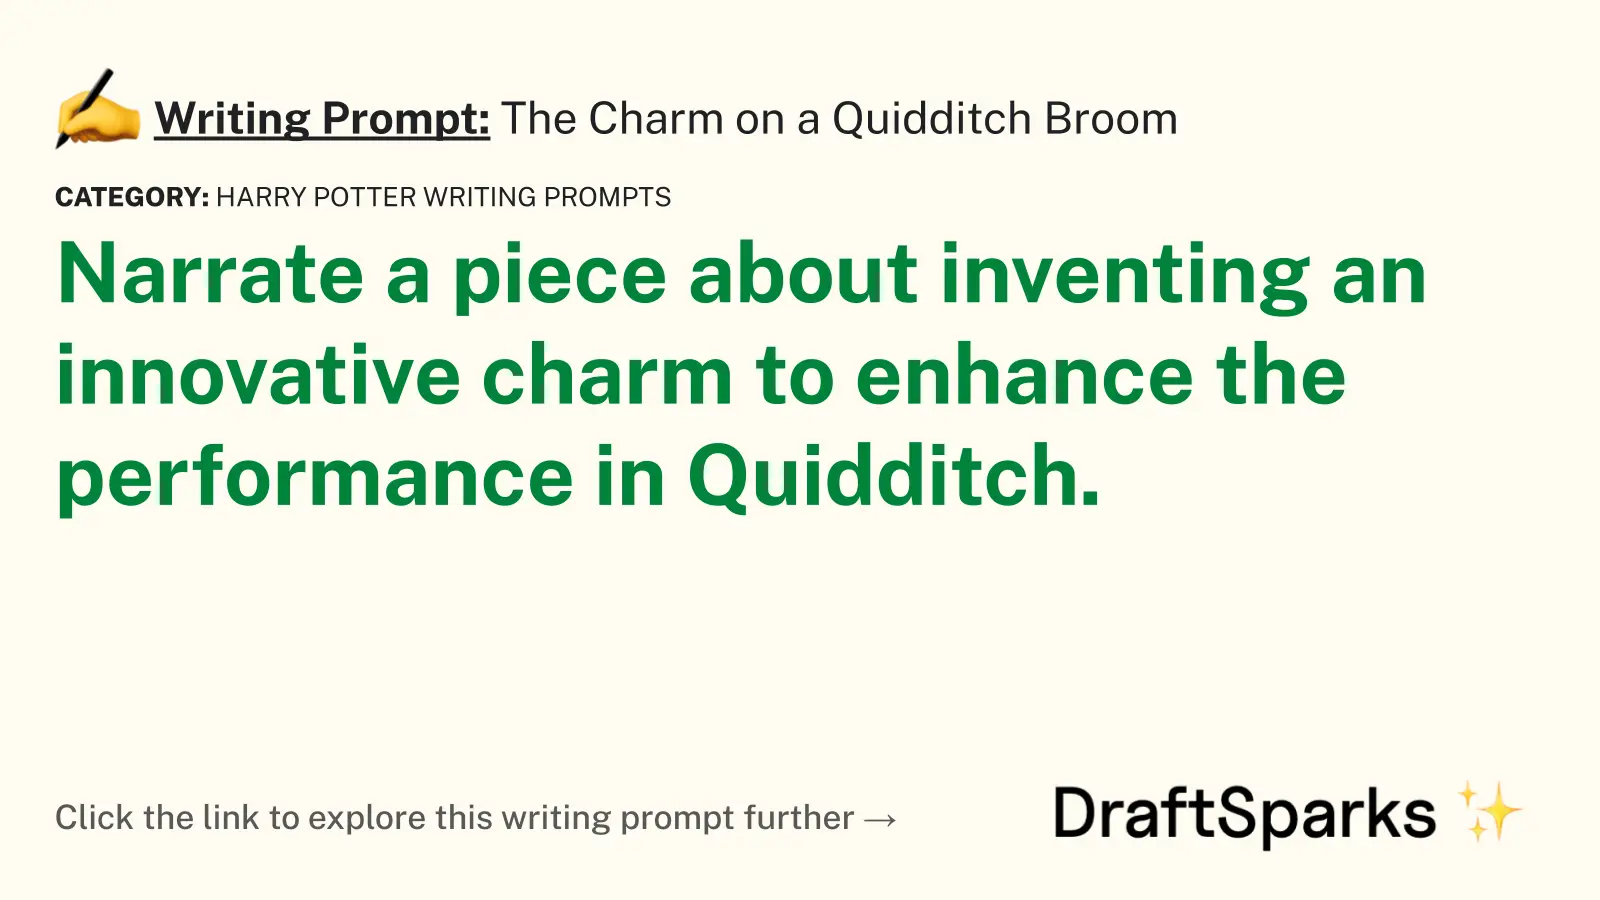 The Charm on a Quidditch Broom